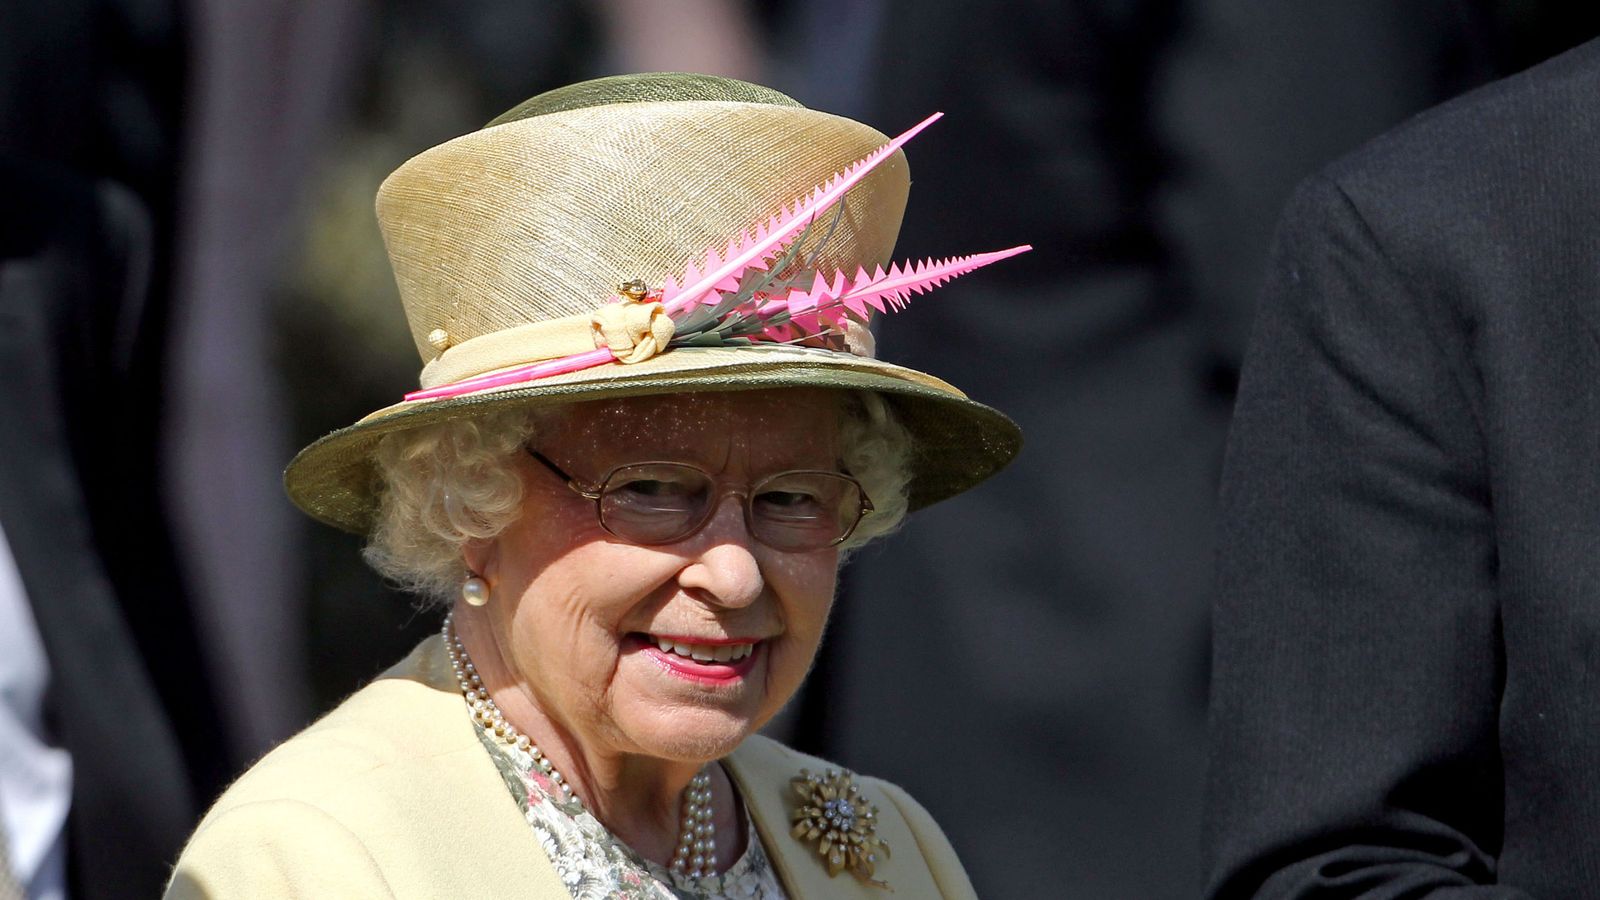 The Queen to present Derby trophy at Epsom Racing News Sky Sports